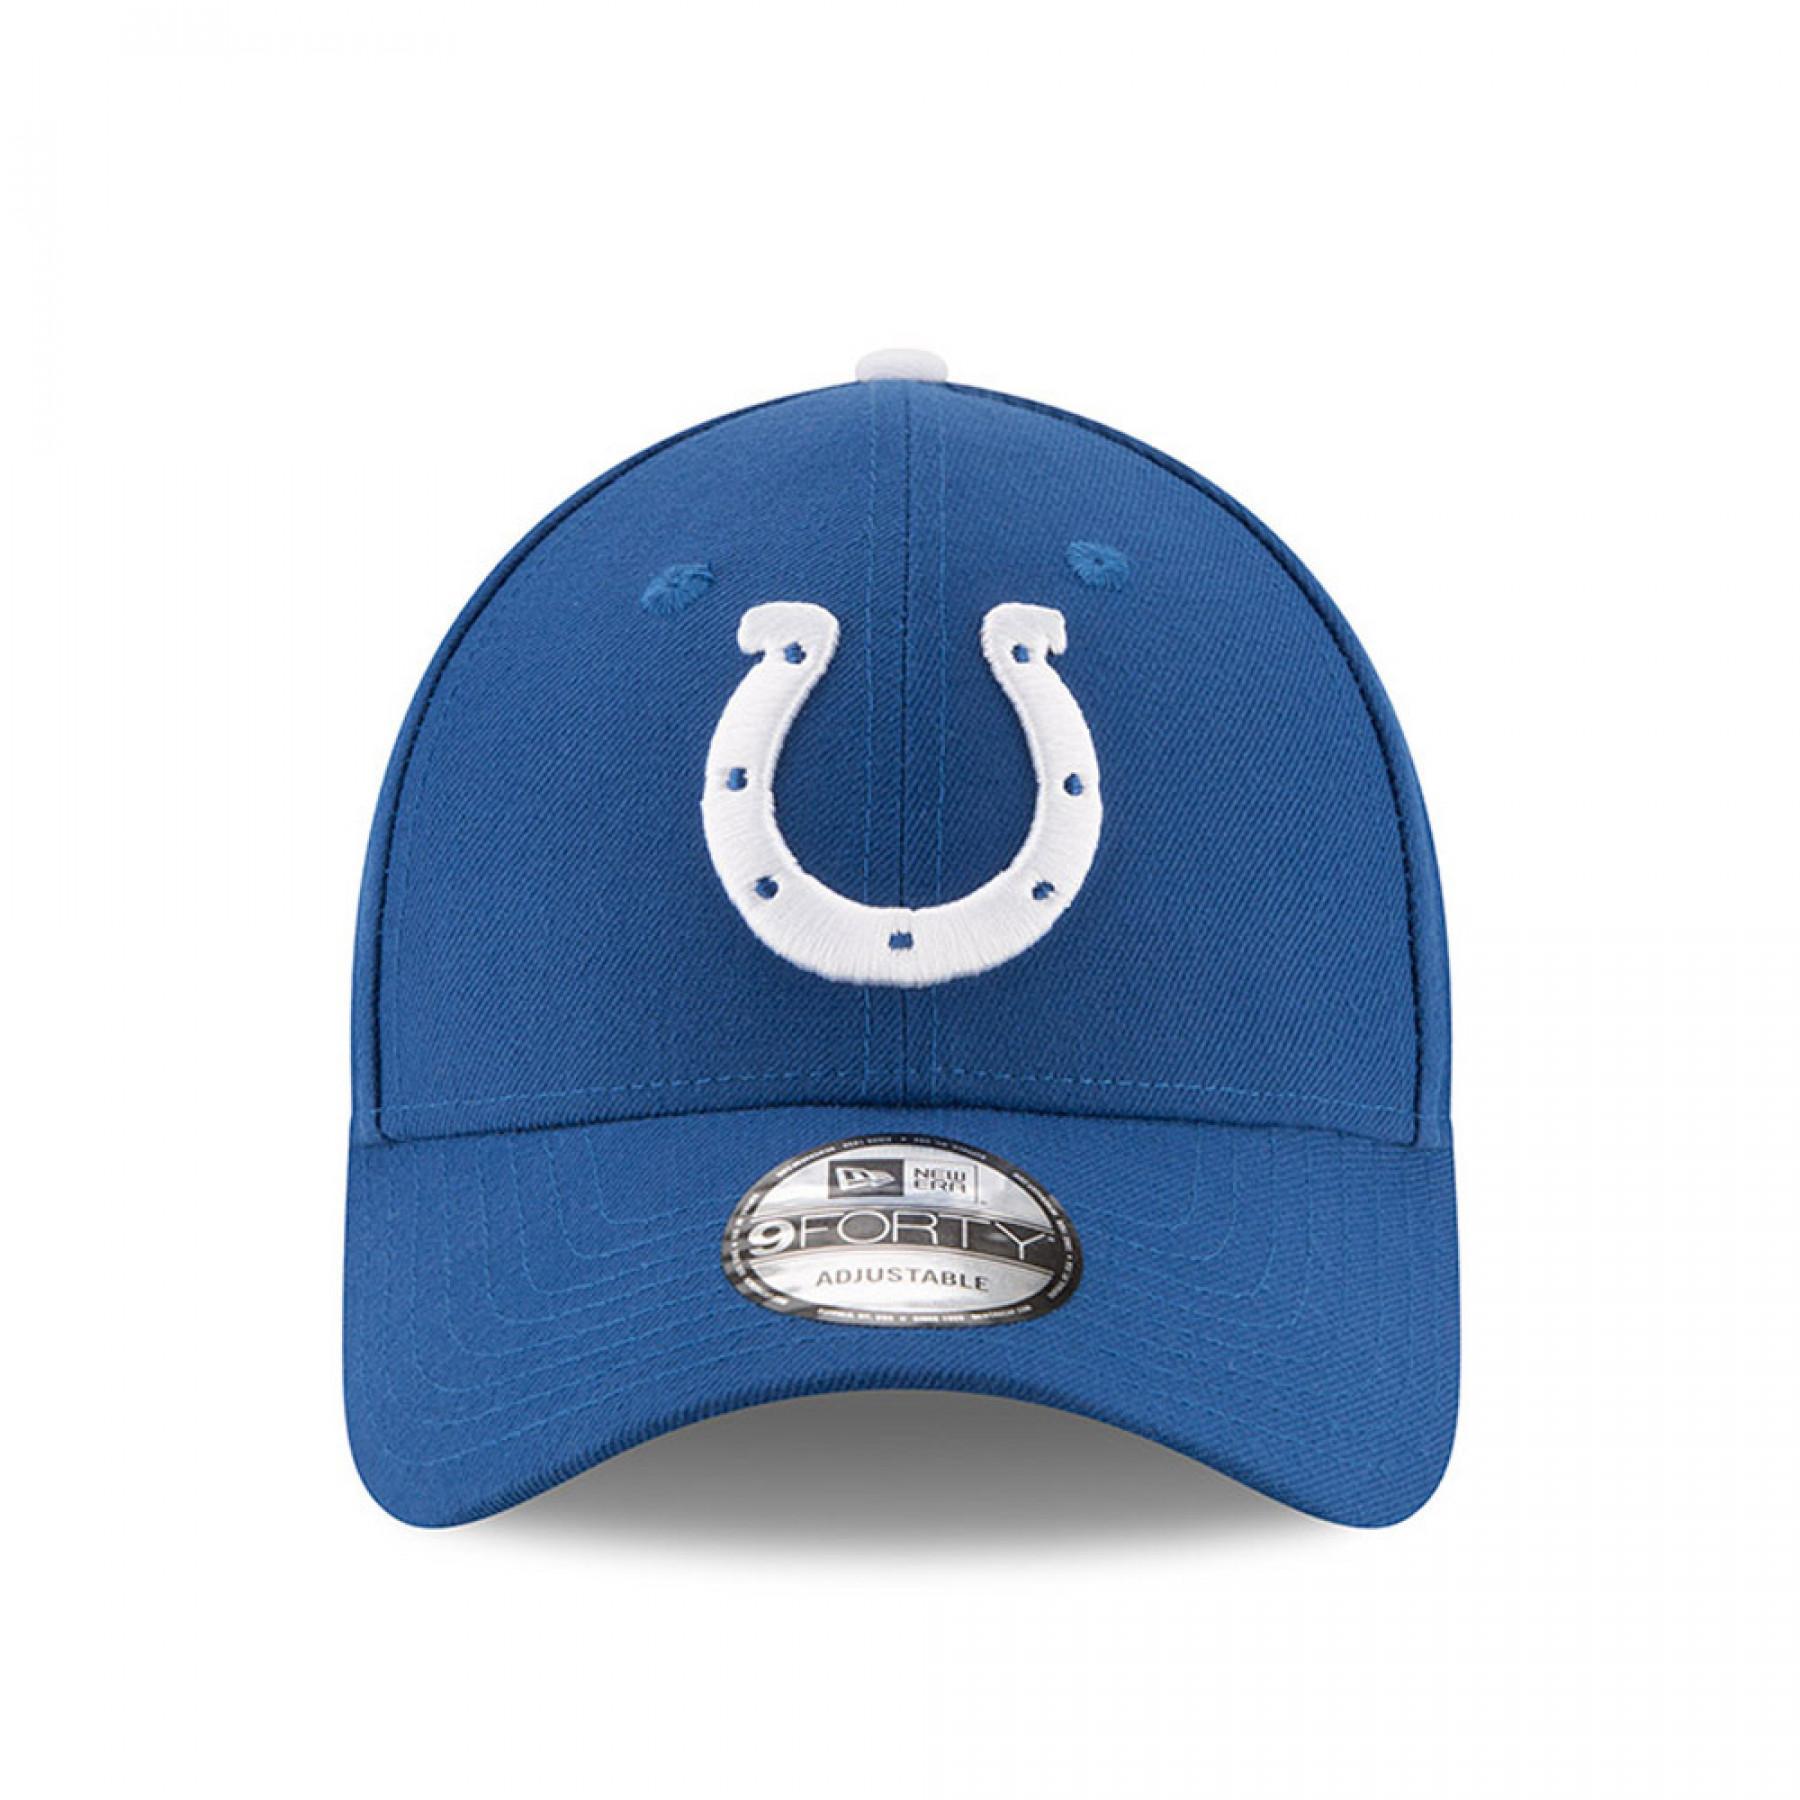 Casquette New Era  The League 9forty Indianapolis Colts